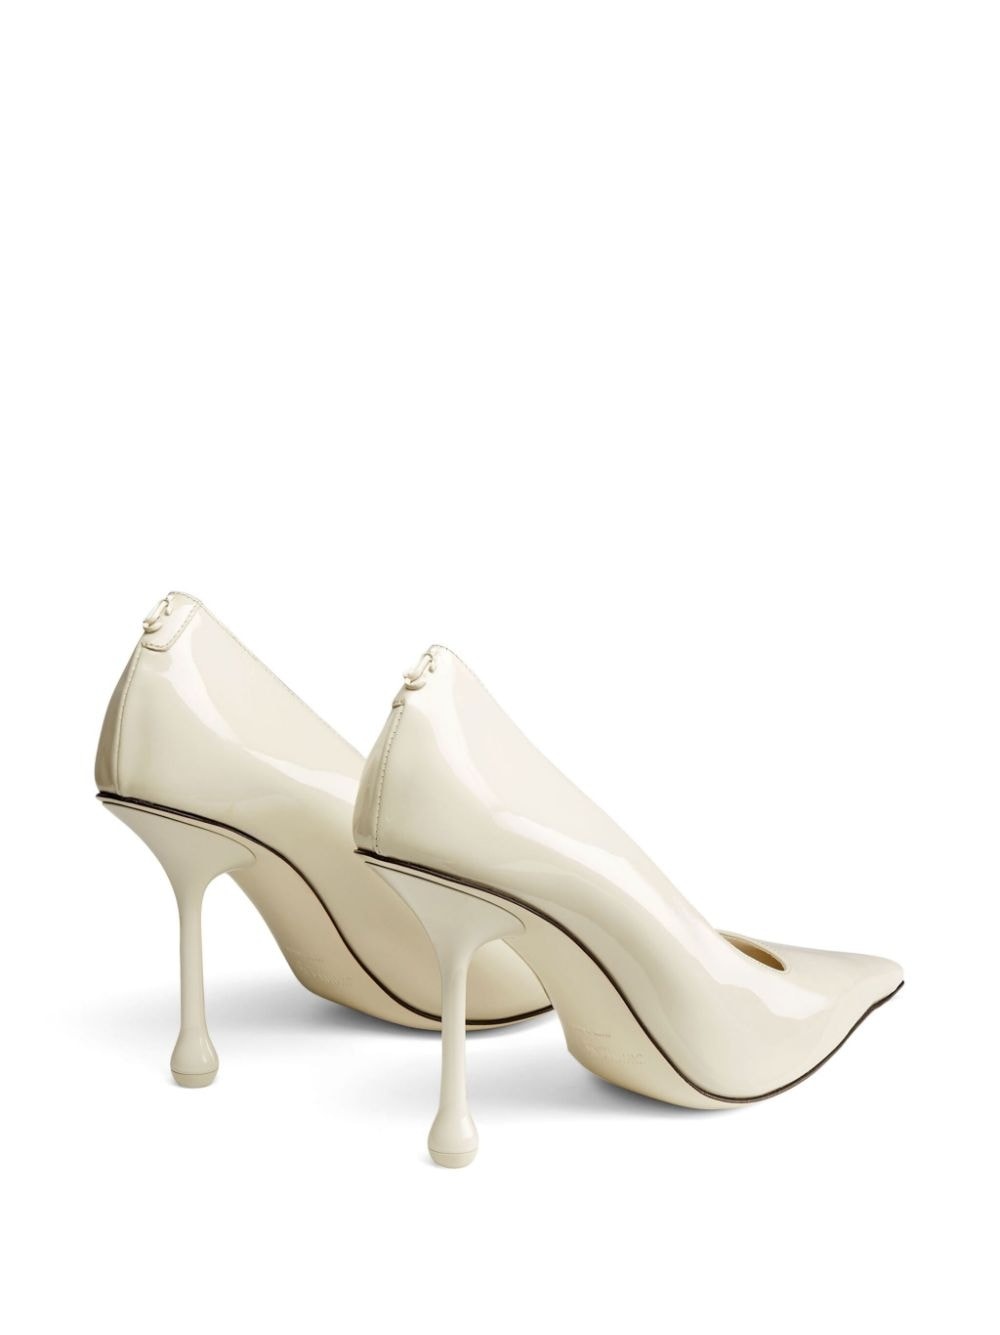 Ixia 95mm patent leather pumps - 3